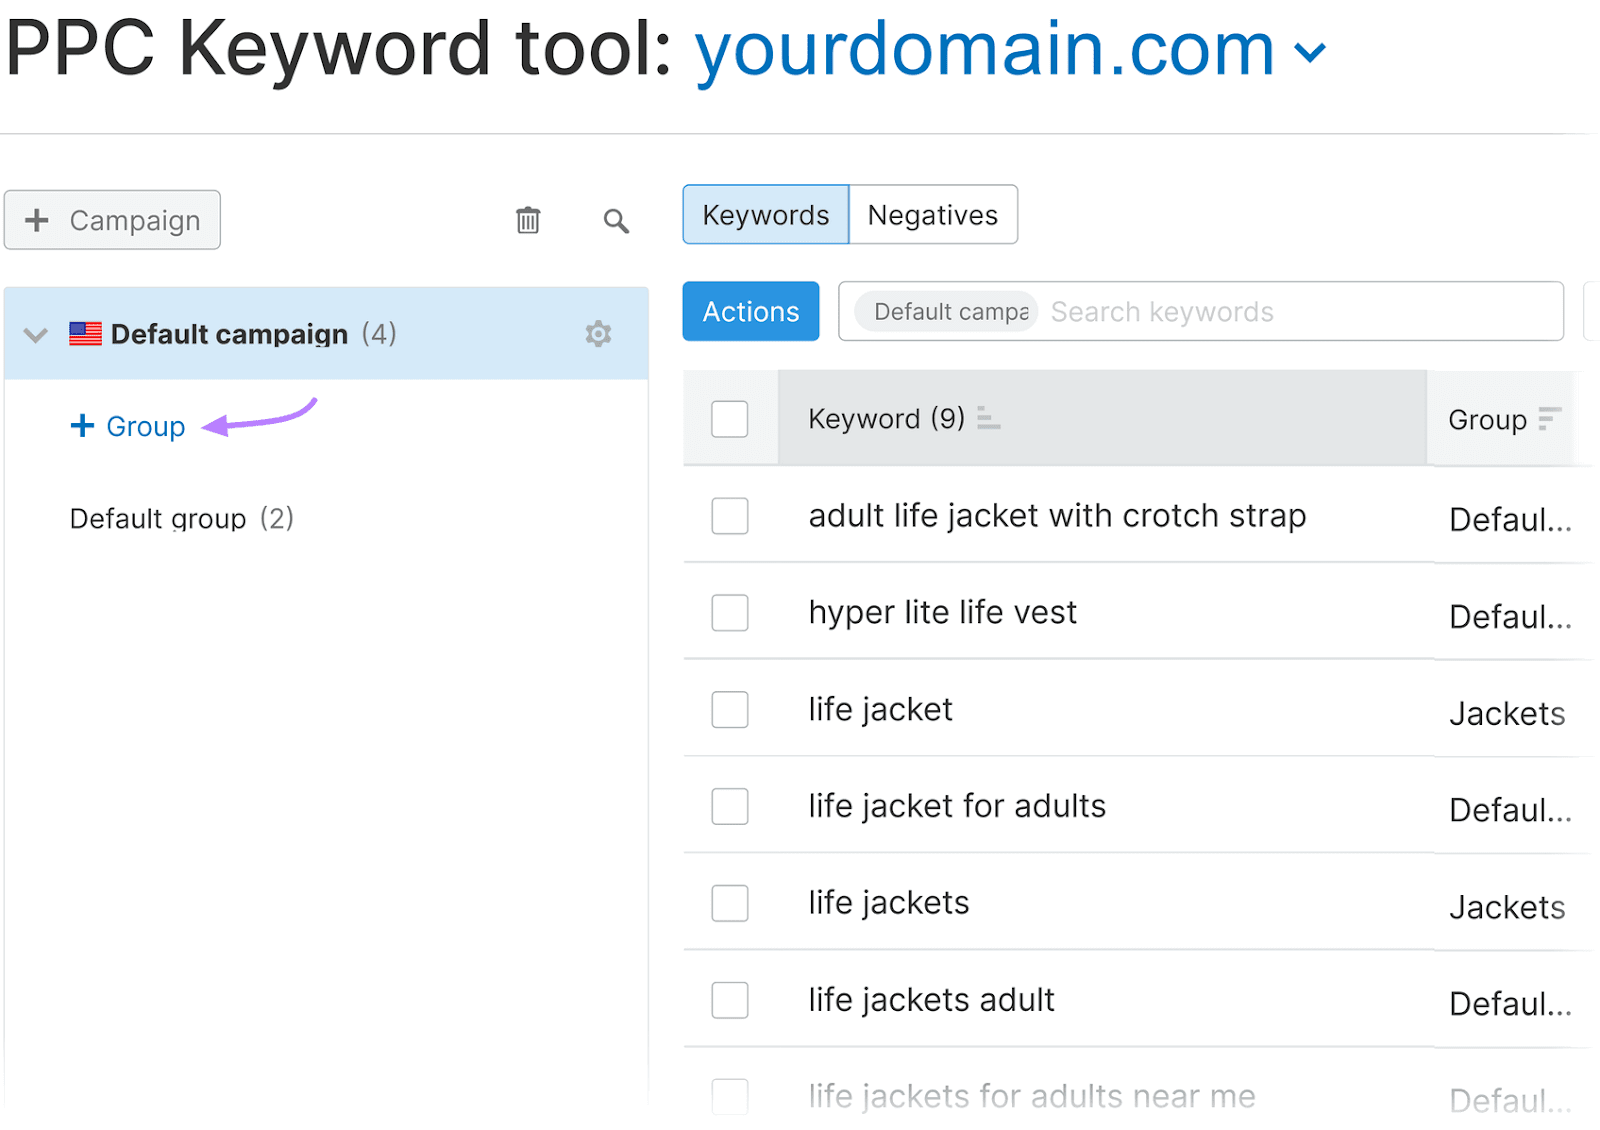 PPC Keyword Tool interface for "yourdomain.com," highlighting the "+ Group" button on the left panel.